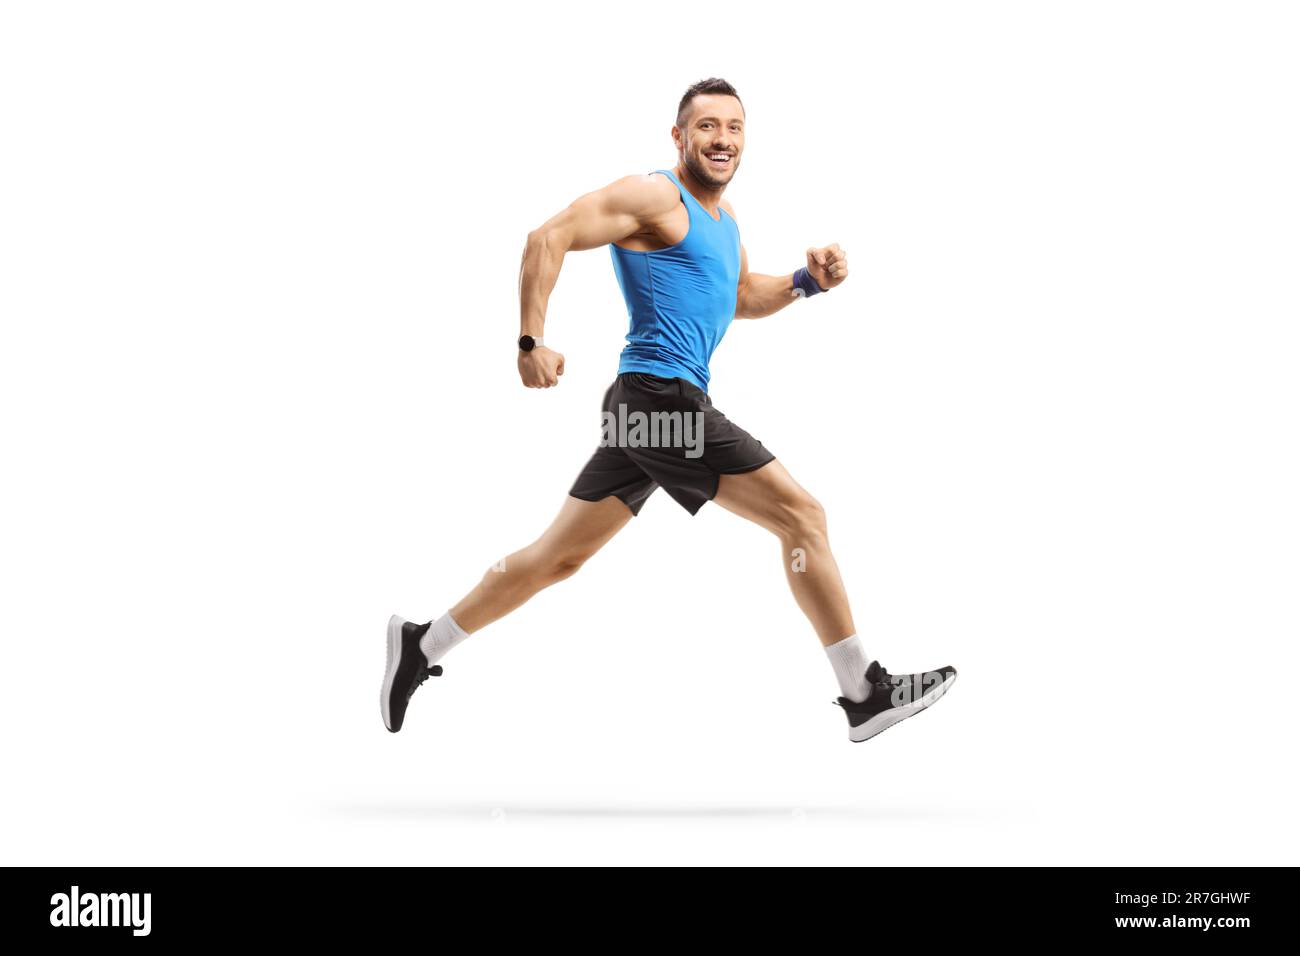 Full length profile shot of a man in sportswear running and smiling isolated on white background Stock Photo